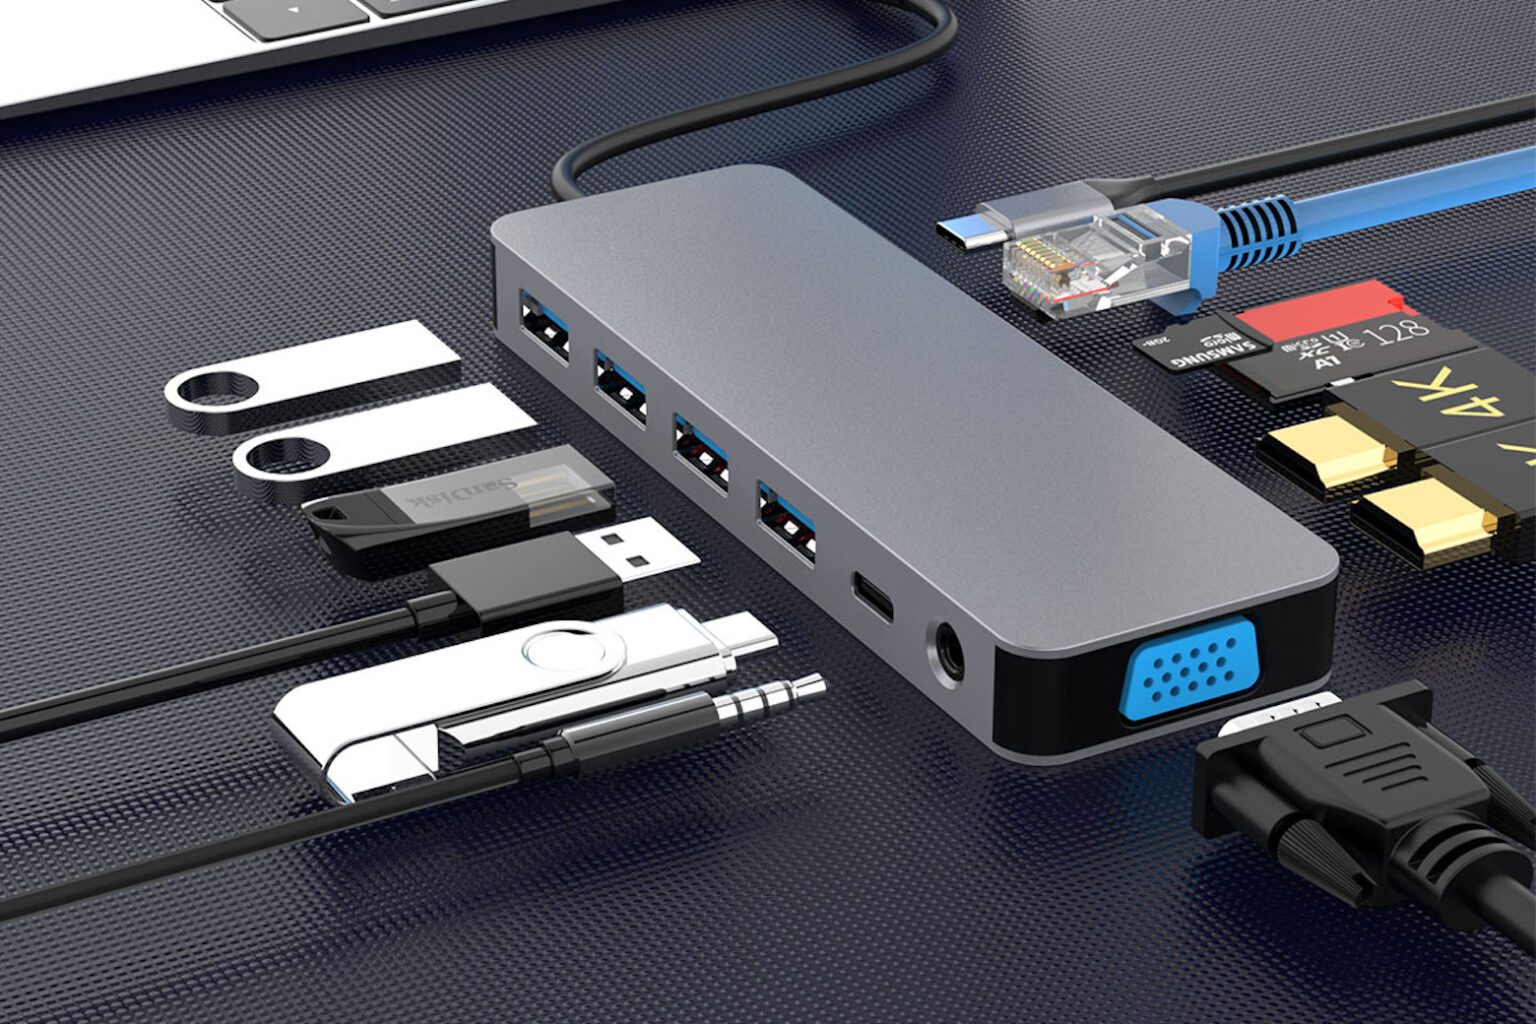 Find a home for all the tech with 14% off this 13-port docking station.